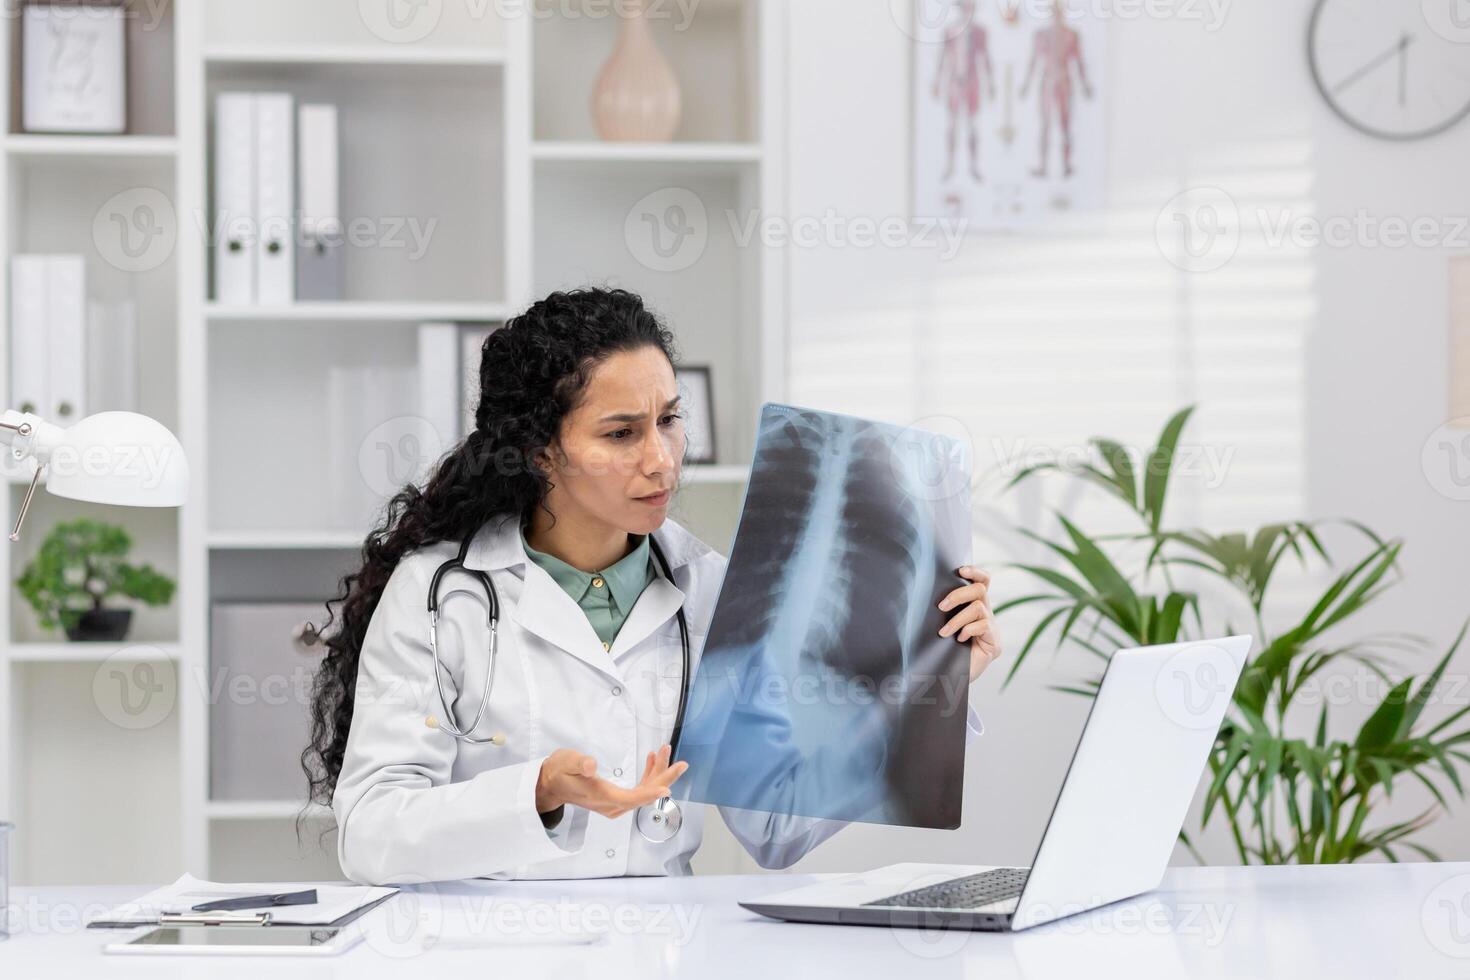 A professional female doctor examines an X-ray film, focusing intently in her modern office filled with medical charts and plants. photo